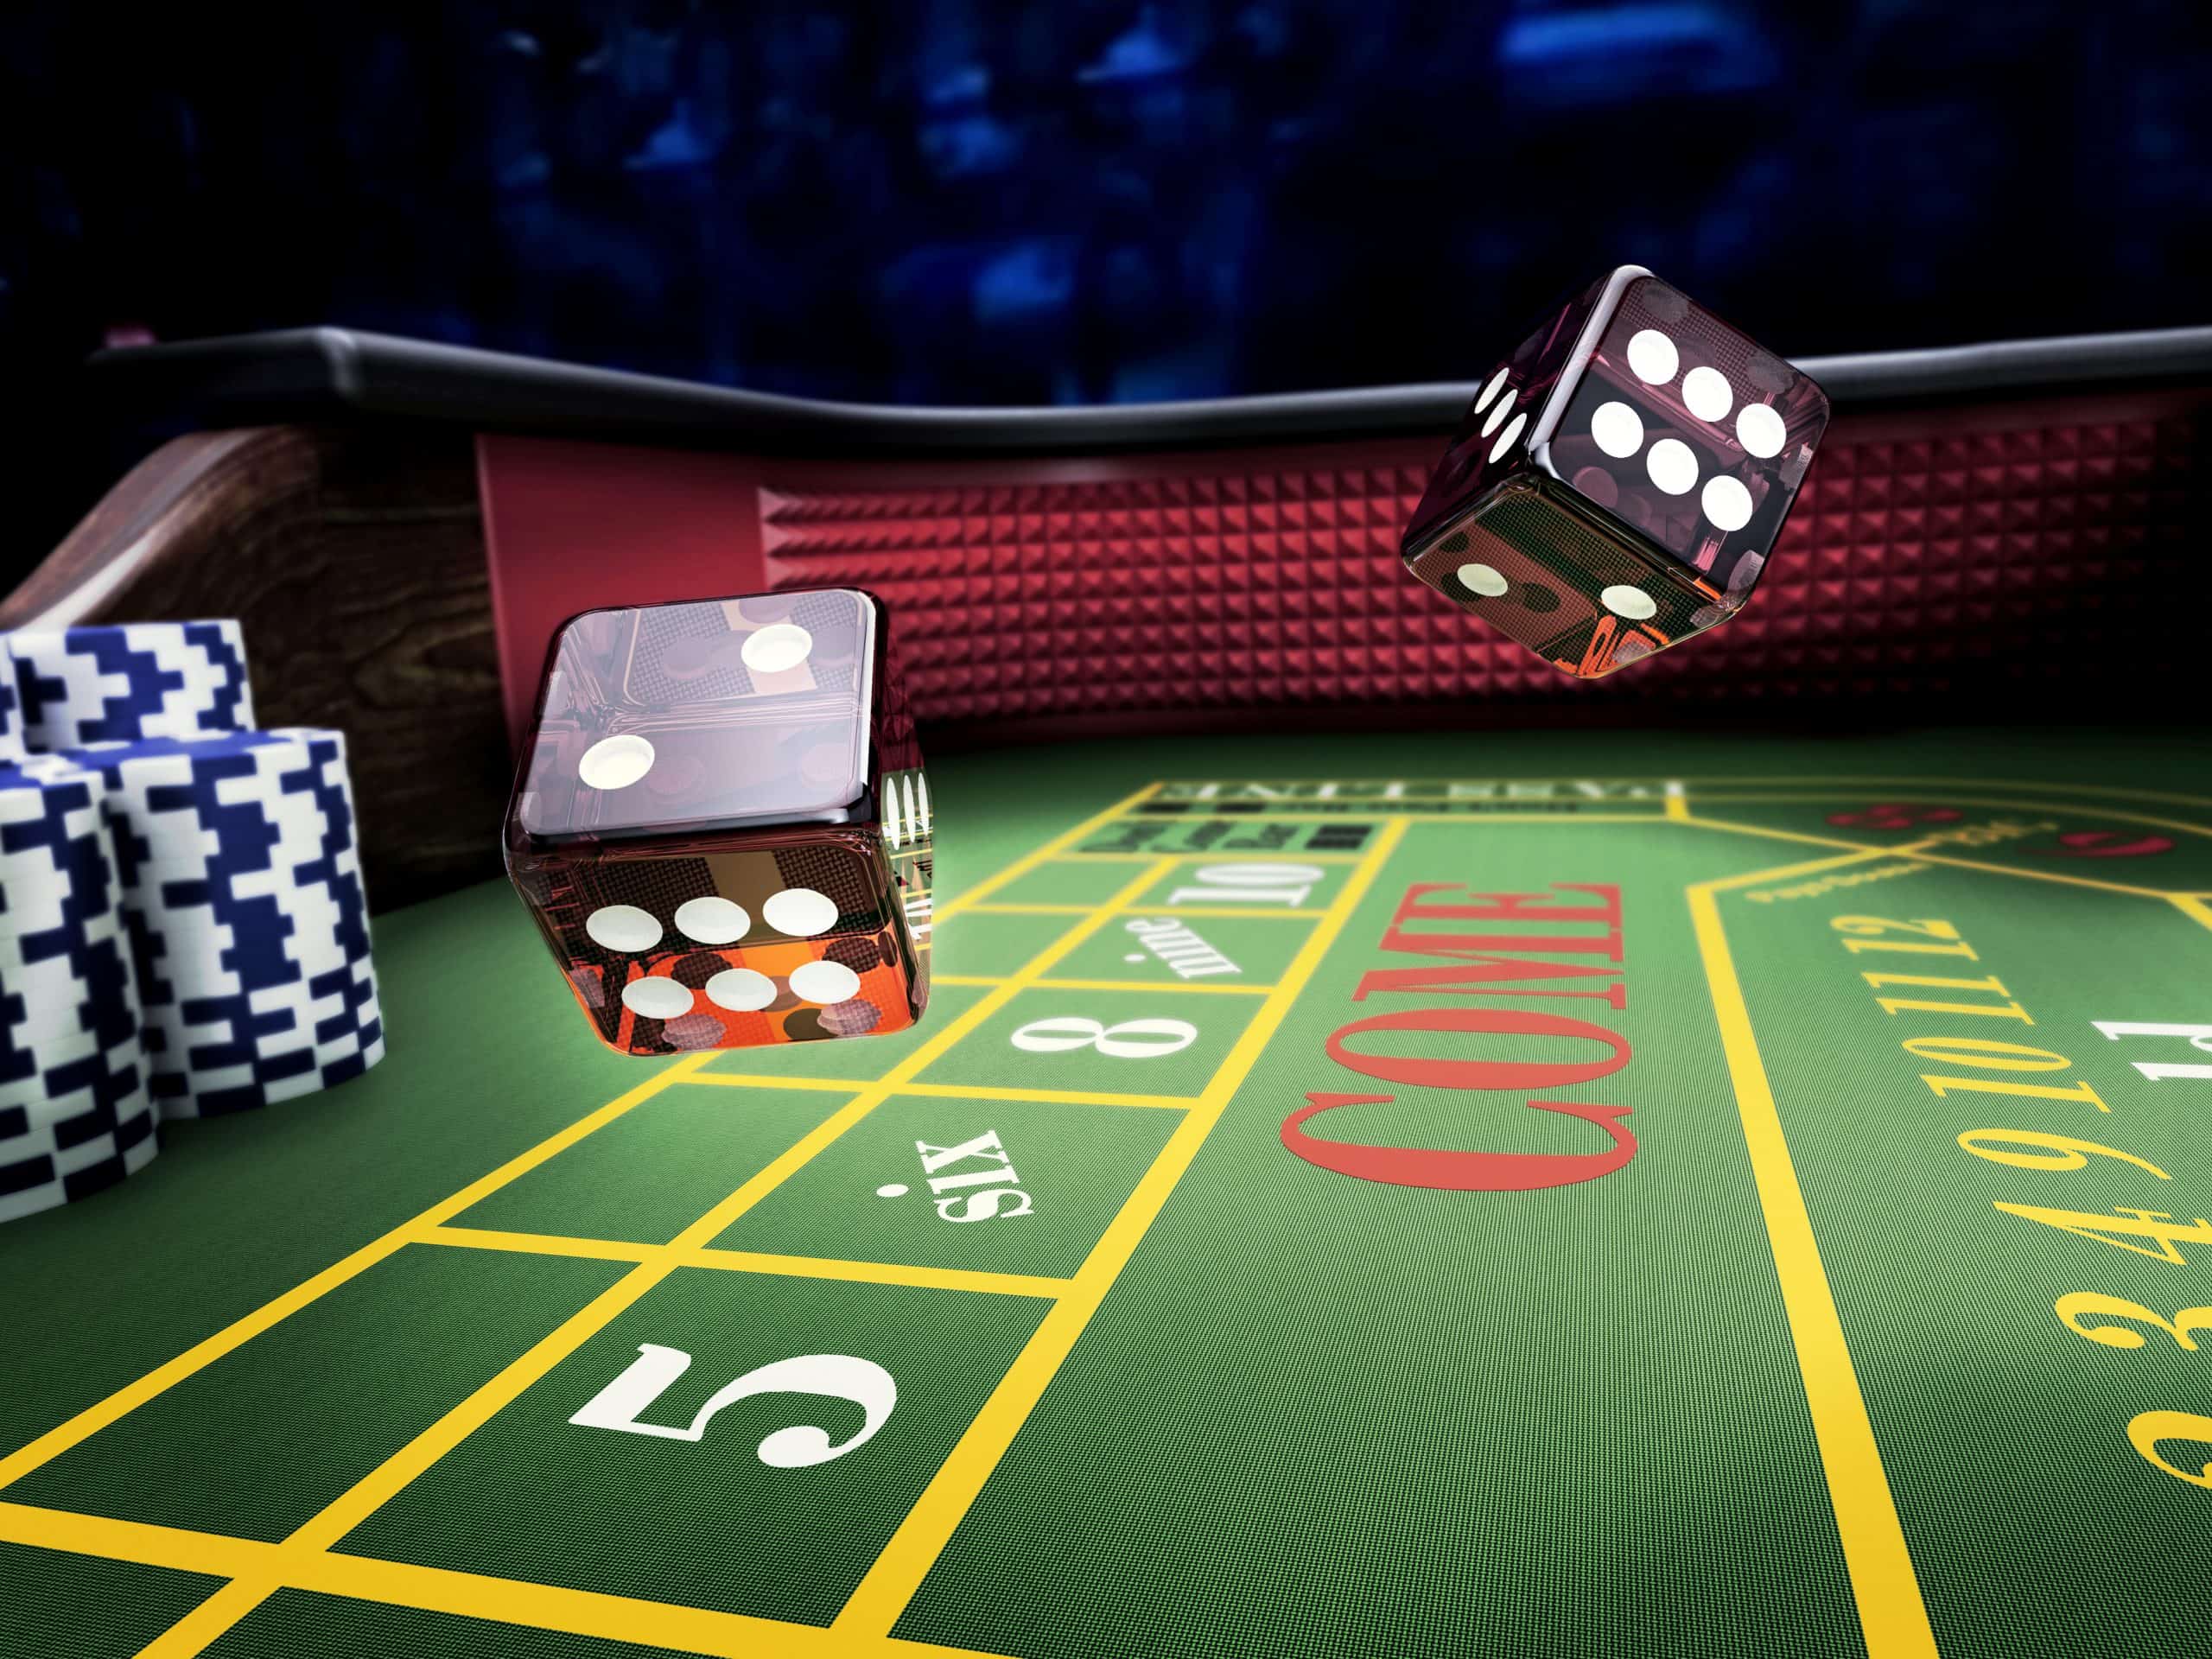 How To Buy Hrvatska casino On A Tight Budget